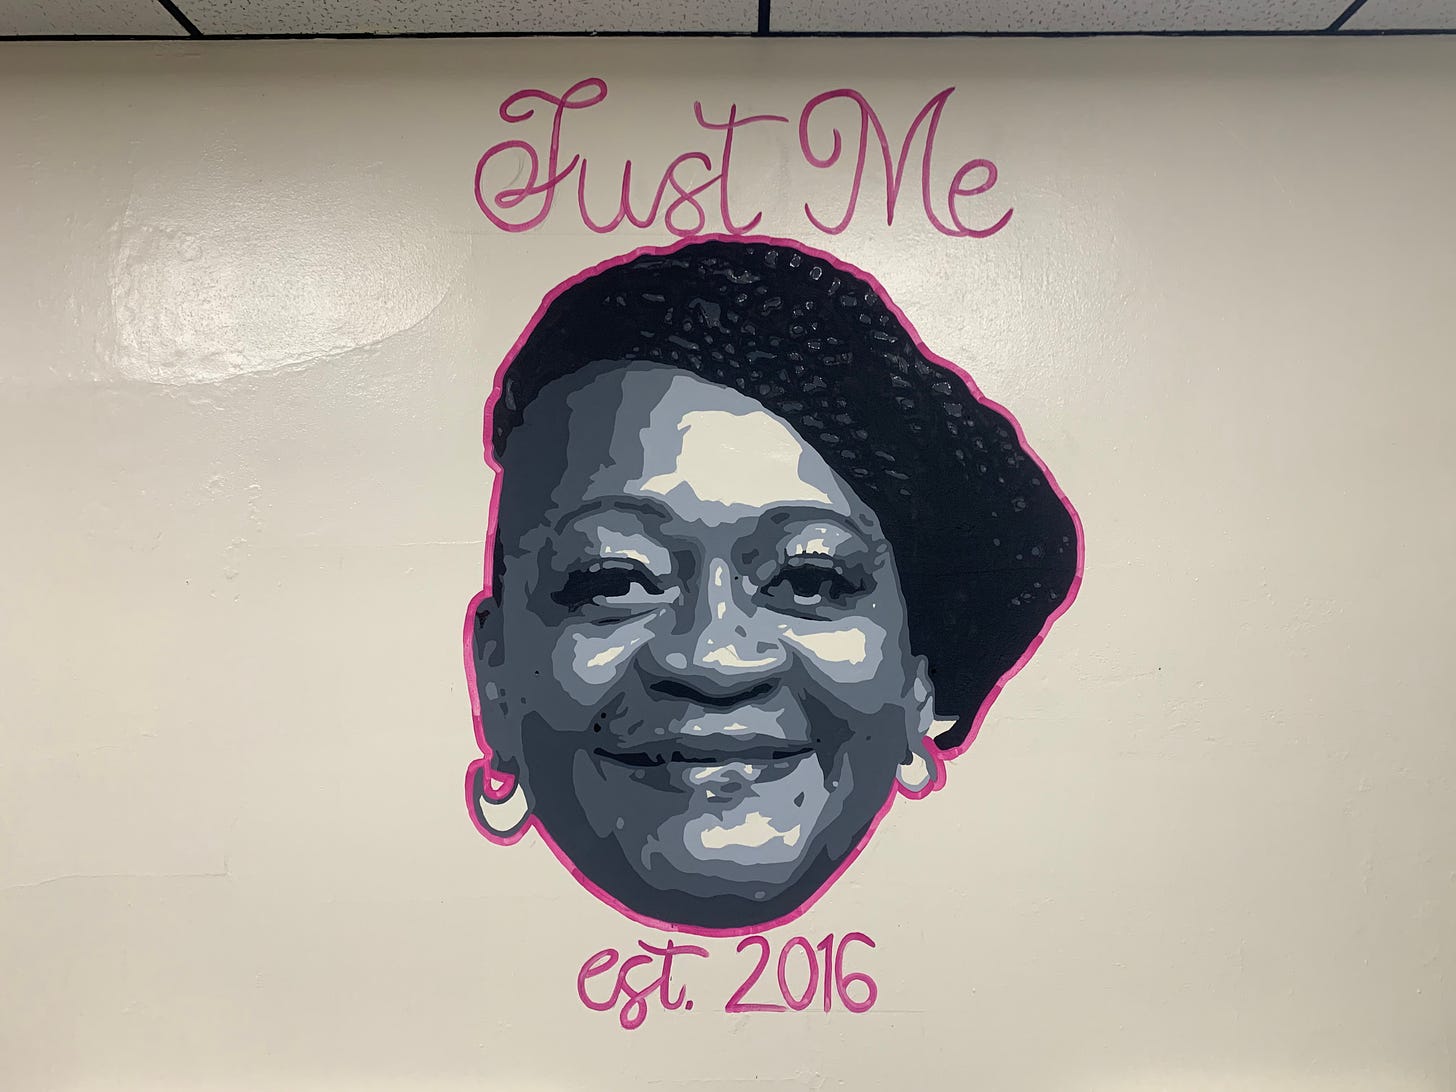 A mural depicting the face of Ms Rica Dabney. Above her says "Just Me" and below her says "est 2016"